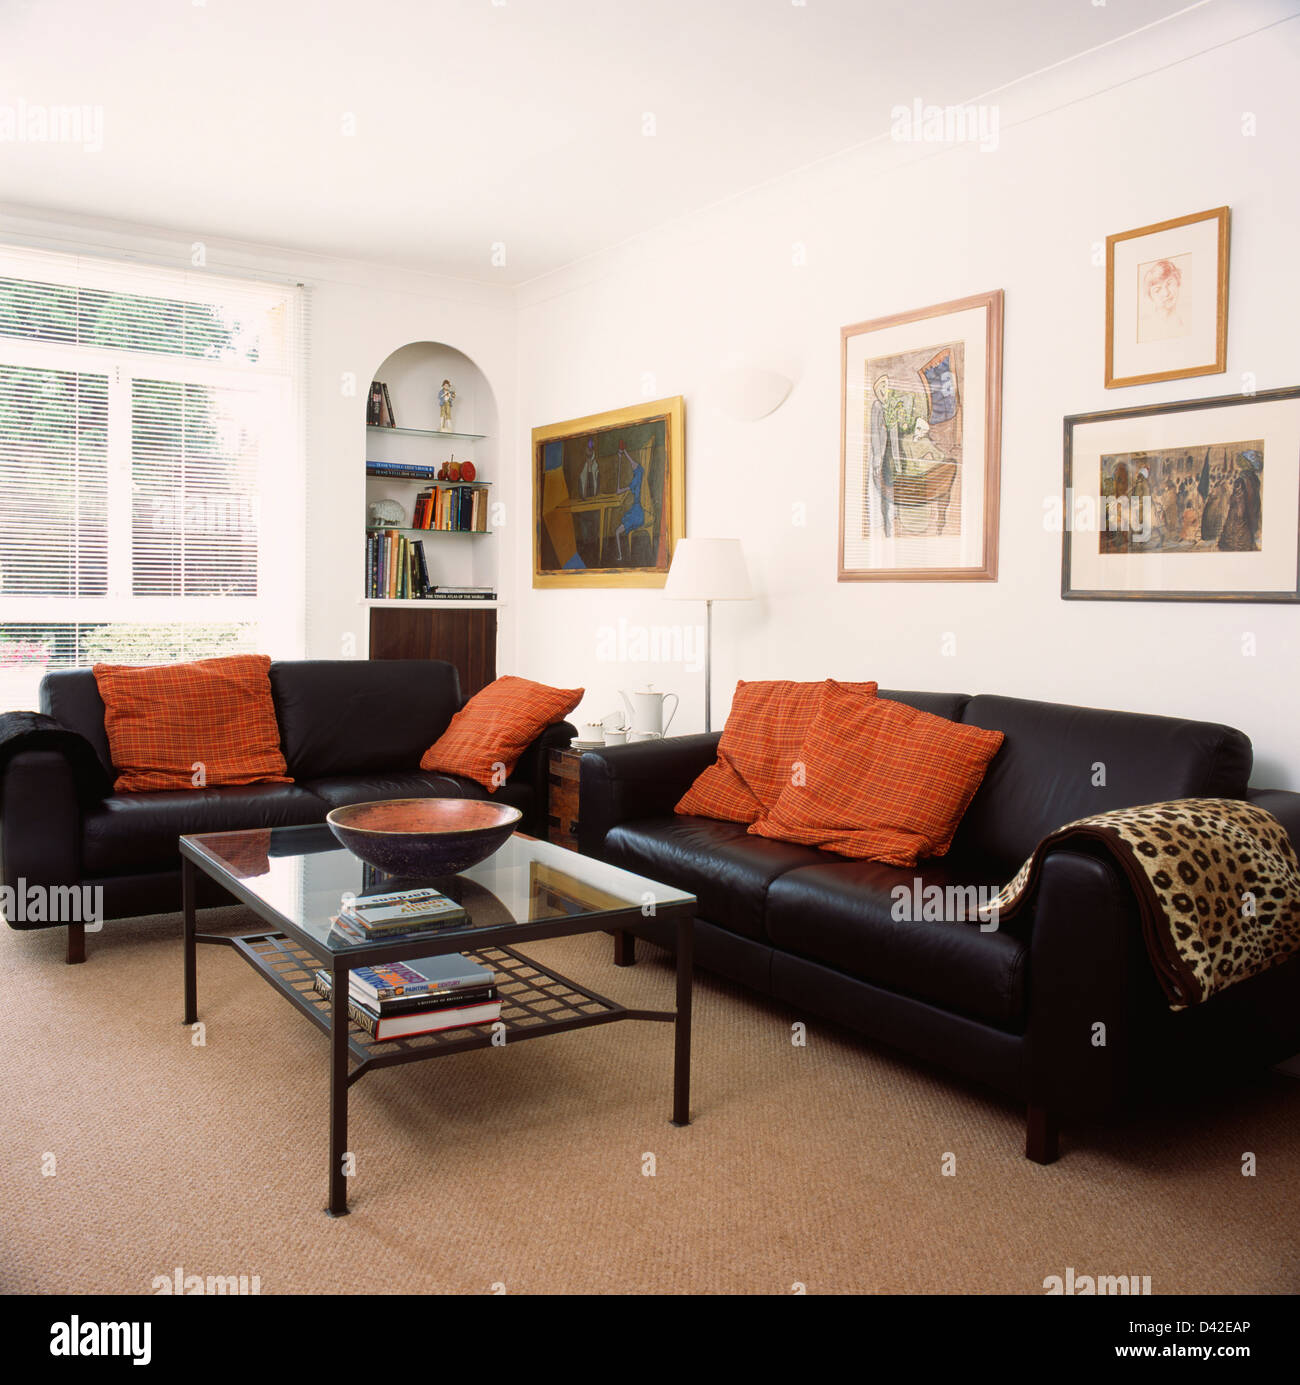 Orange Cushions On Black Leather Sofas In Living Room With Beige